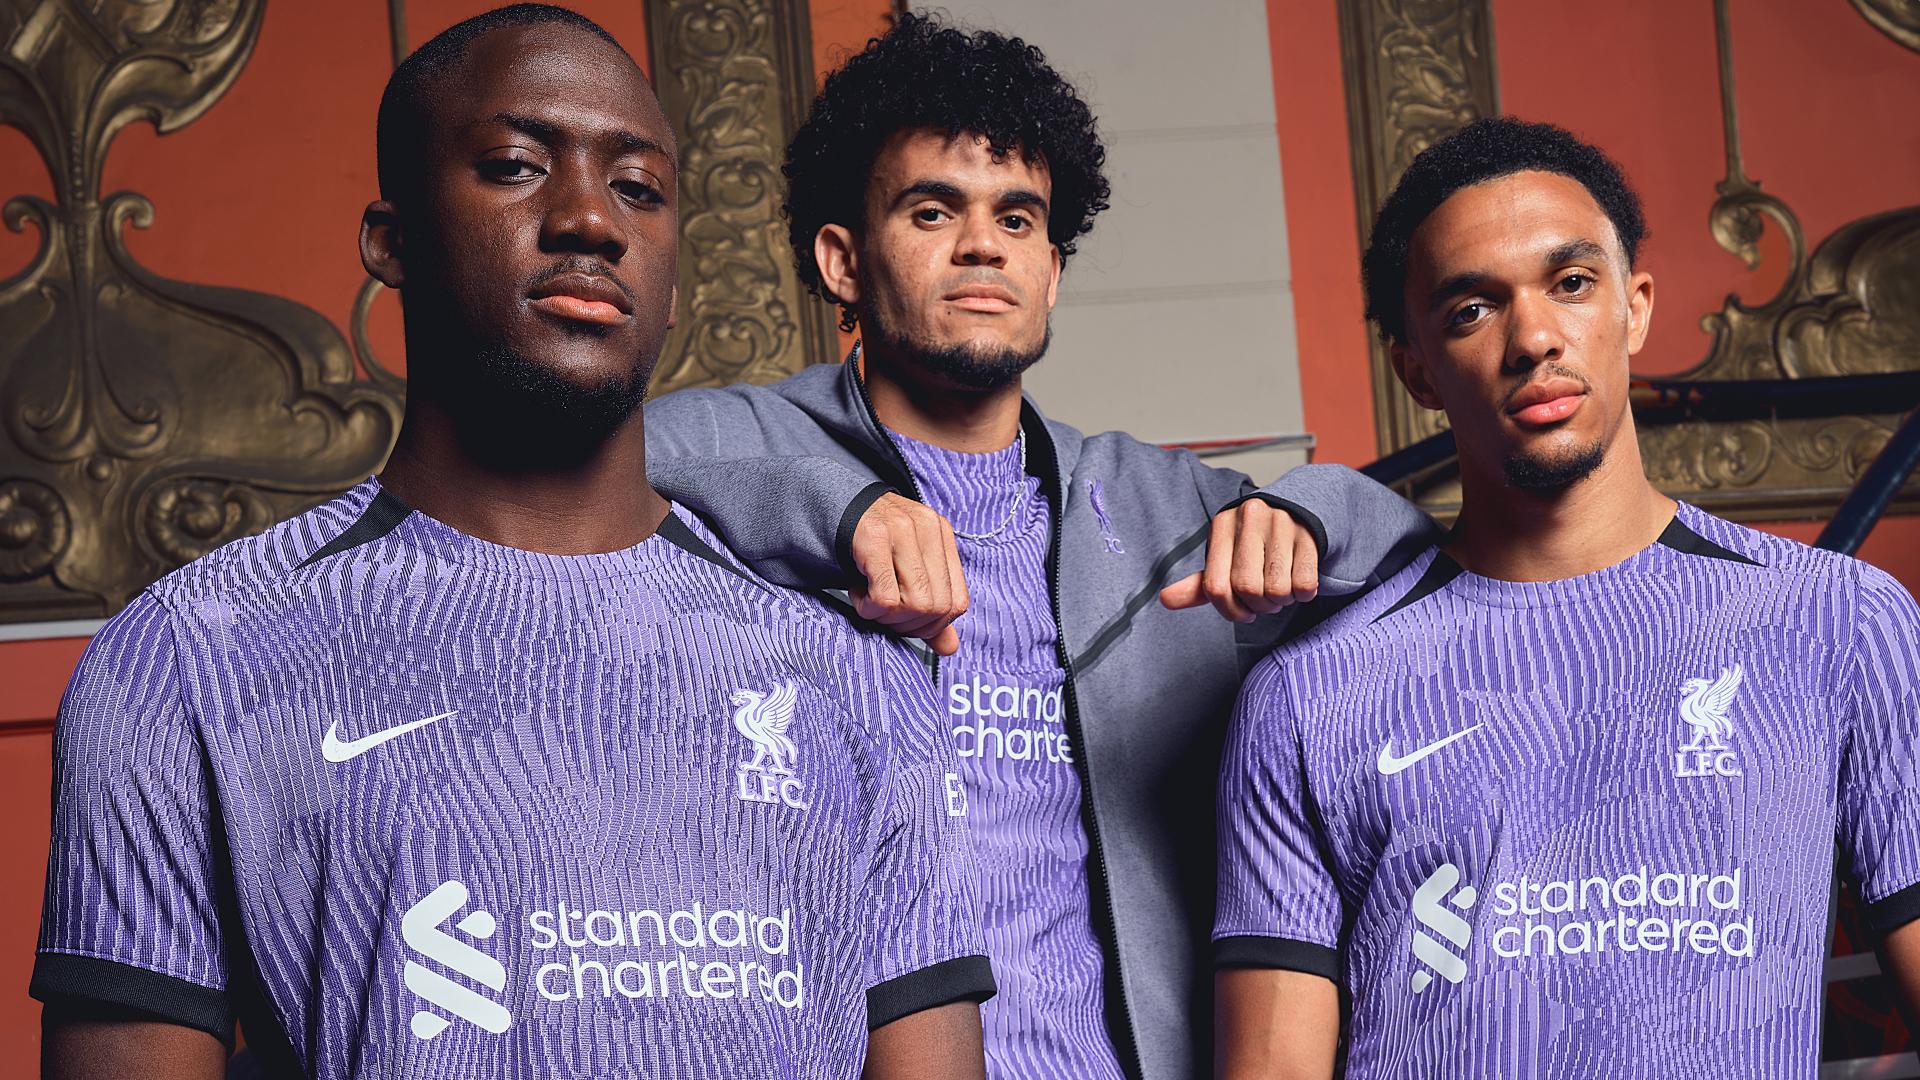 Liverpool FC unveils 2021/22 third kit inspired by famous Kop